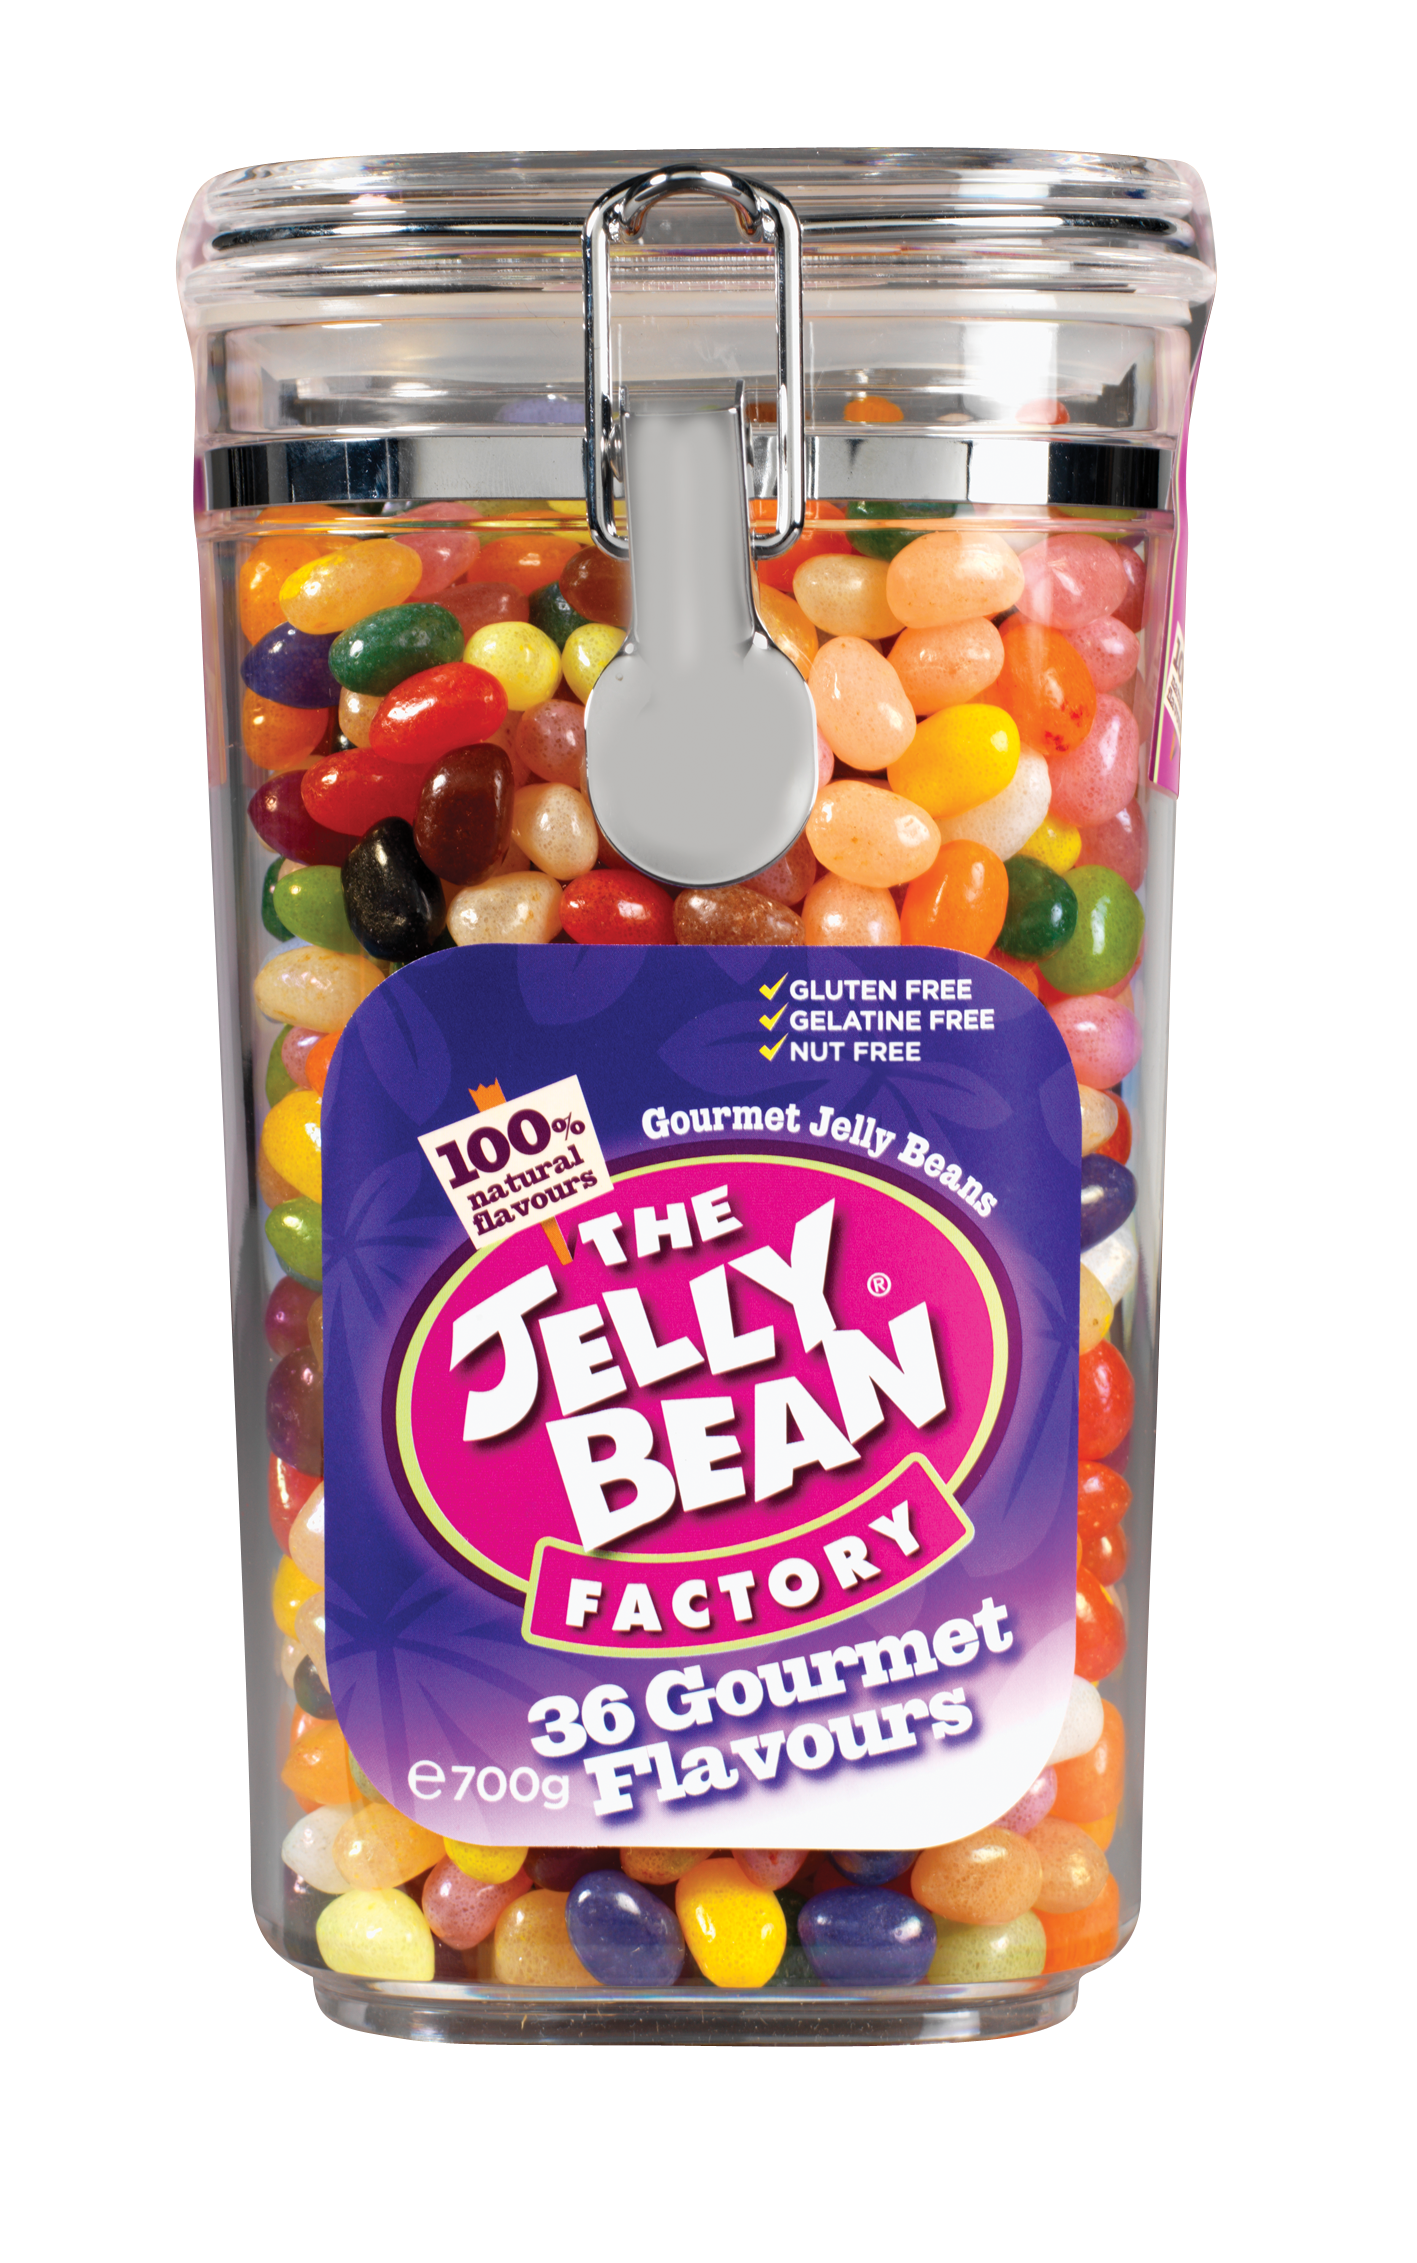 jelly clipart sweet food